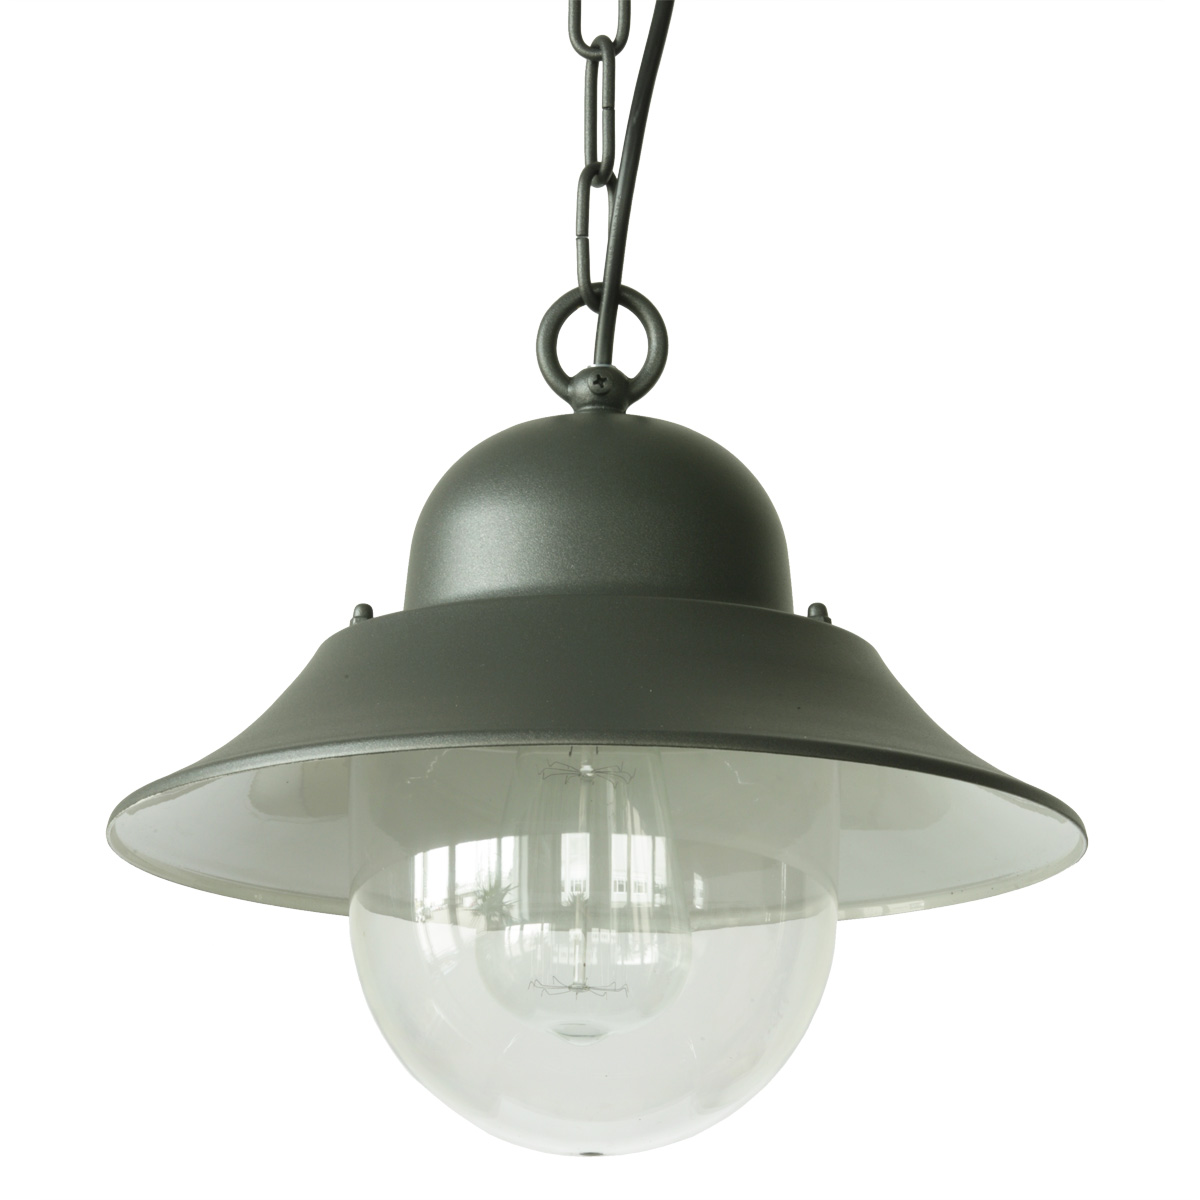 Industrial-Style Outdoor Light with Chain Suspension